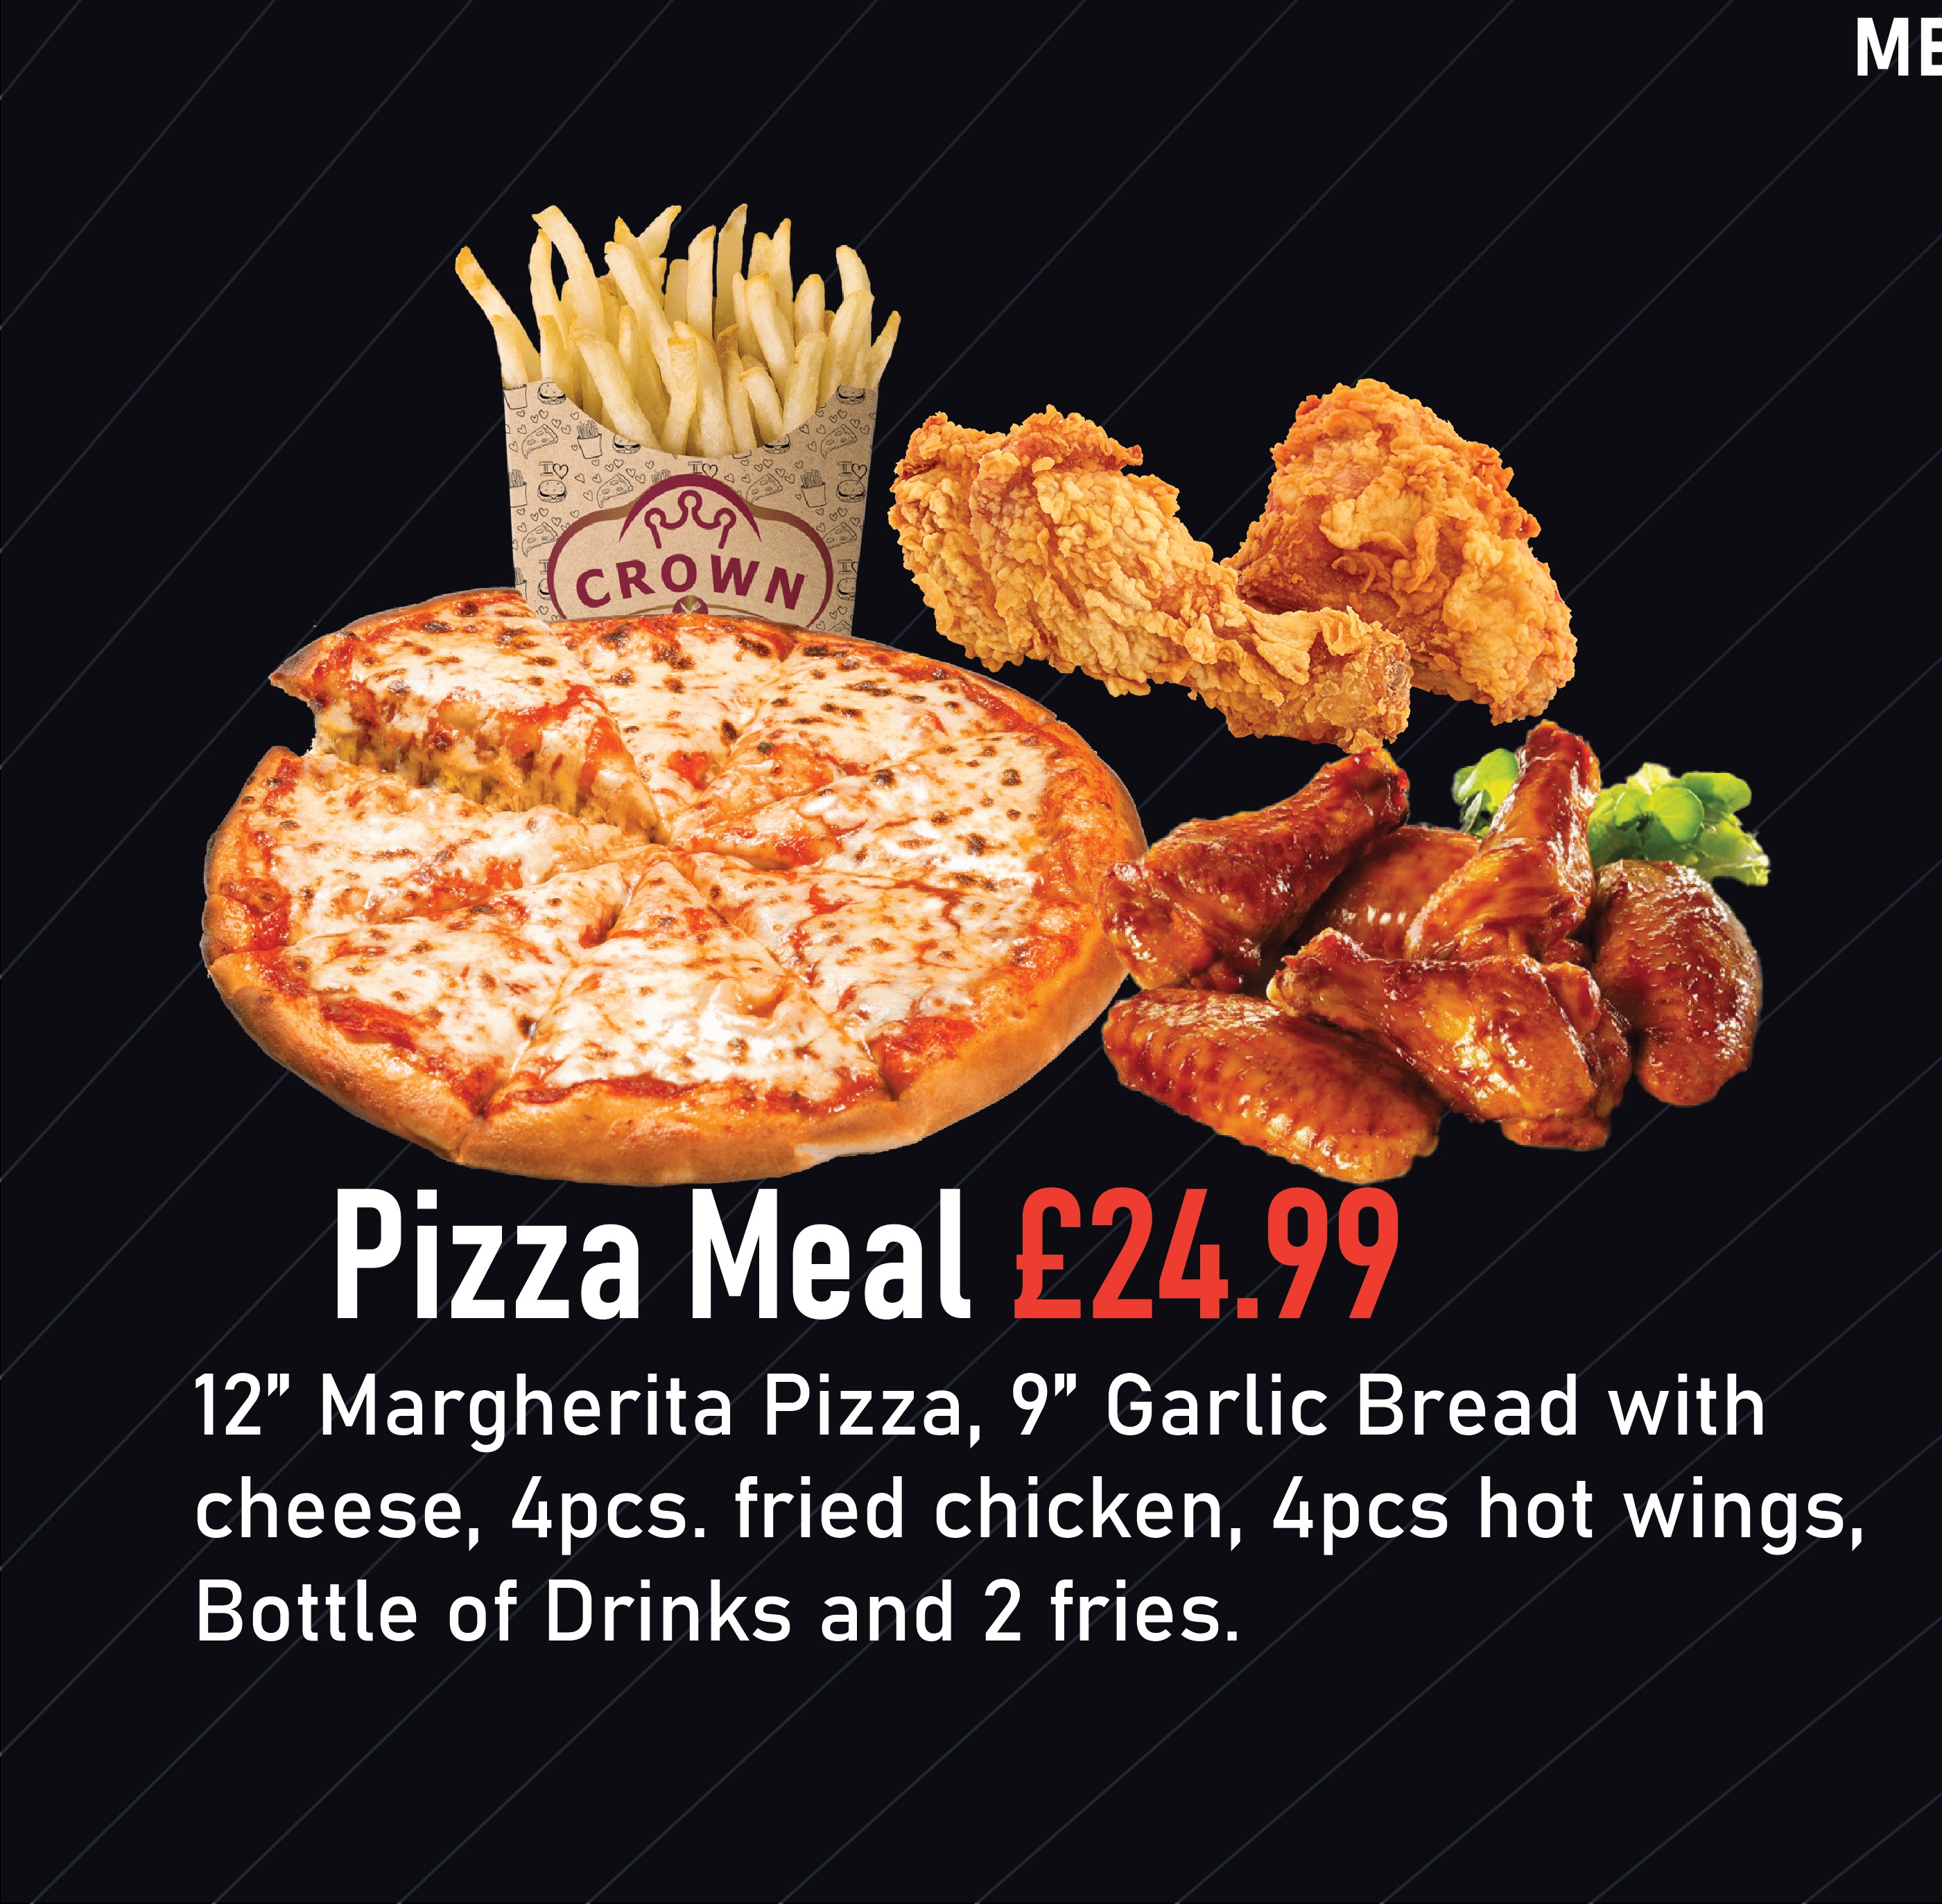 Crown Restaurant-Pizza Meal